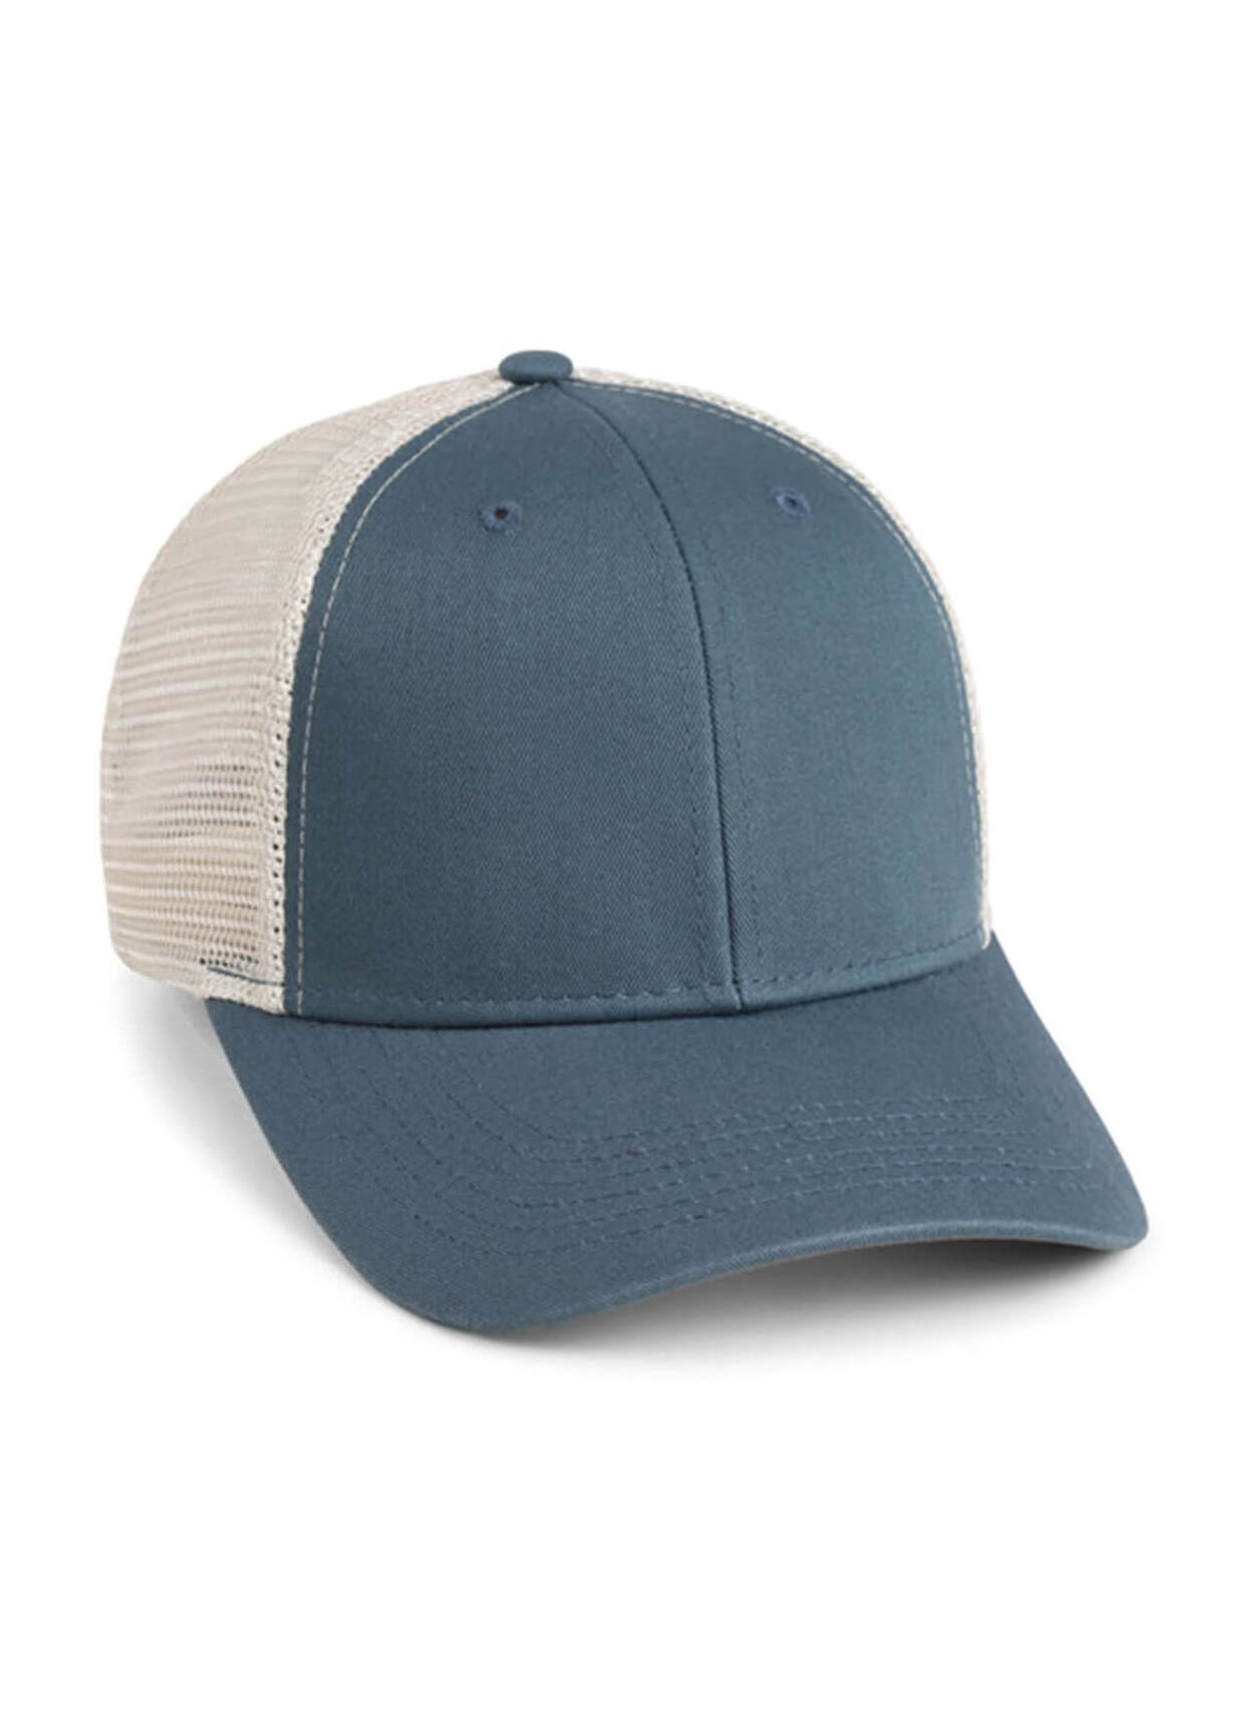 Imperial Breaker Blue / Stone The Catch & Release Hat Adjustable Meshback Hat